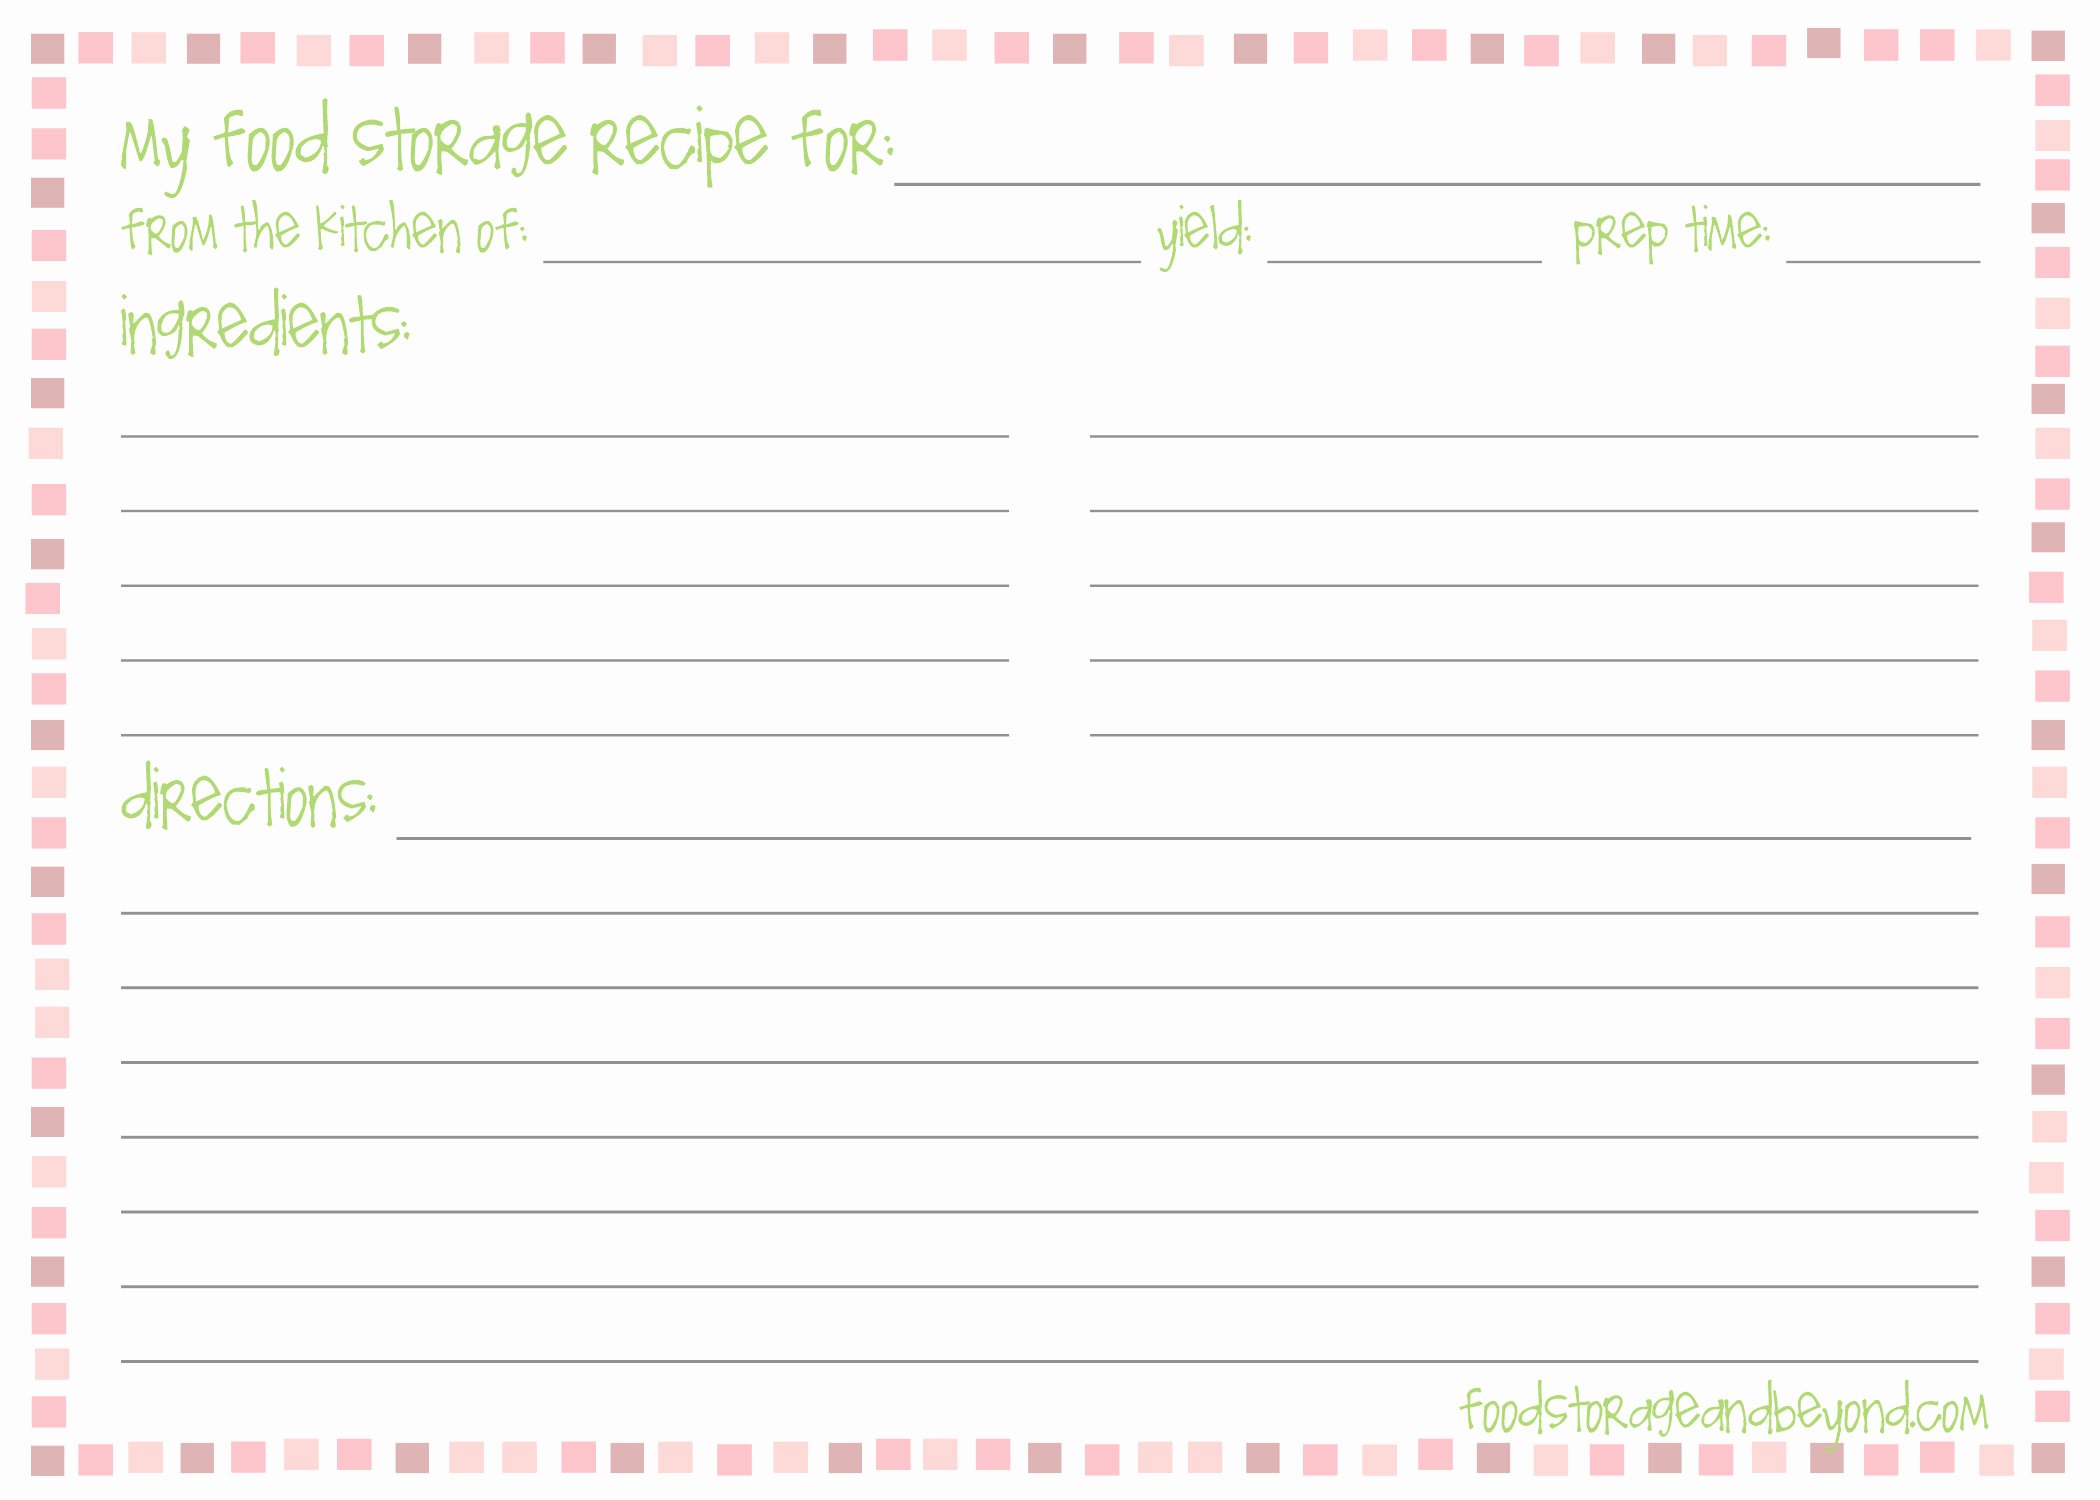 5 X 7 Postcard Template Best Of Recipe Cards – Food Storage and Beyond